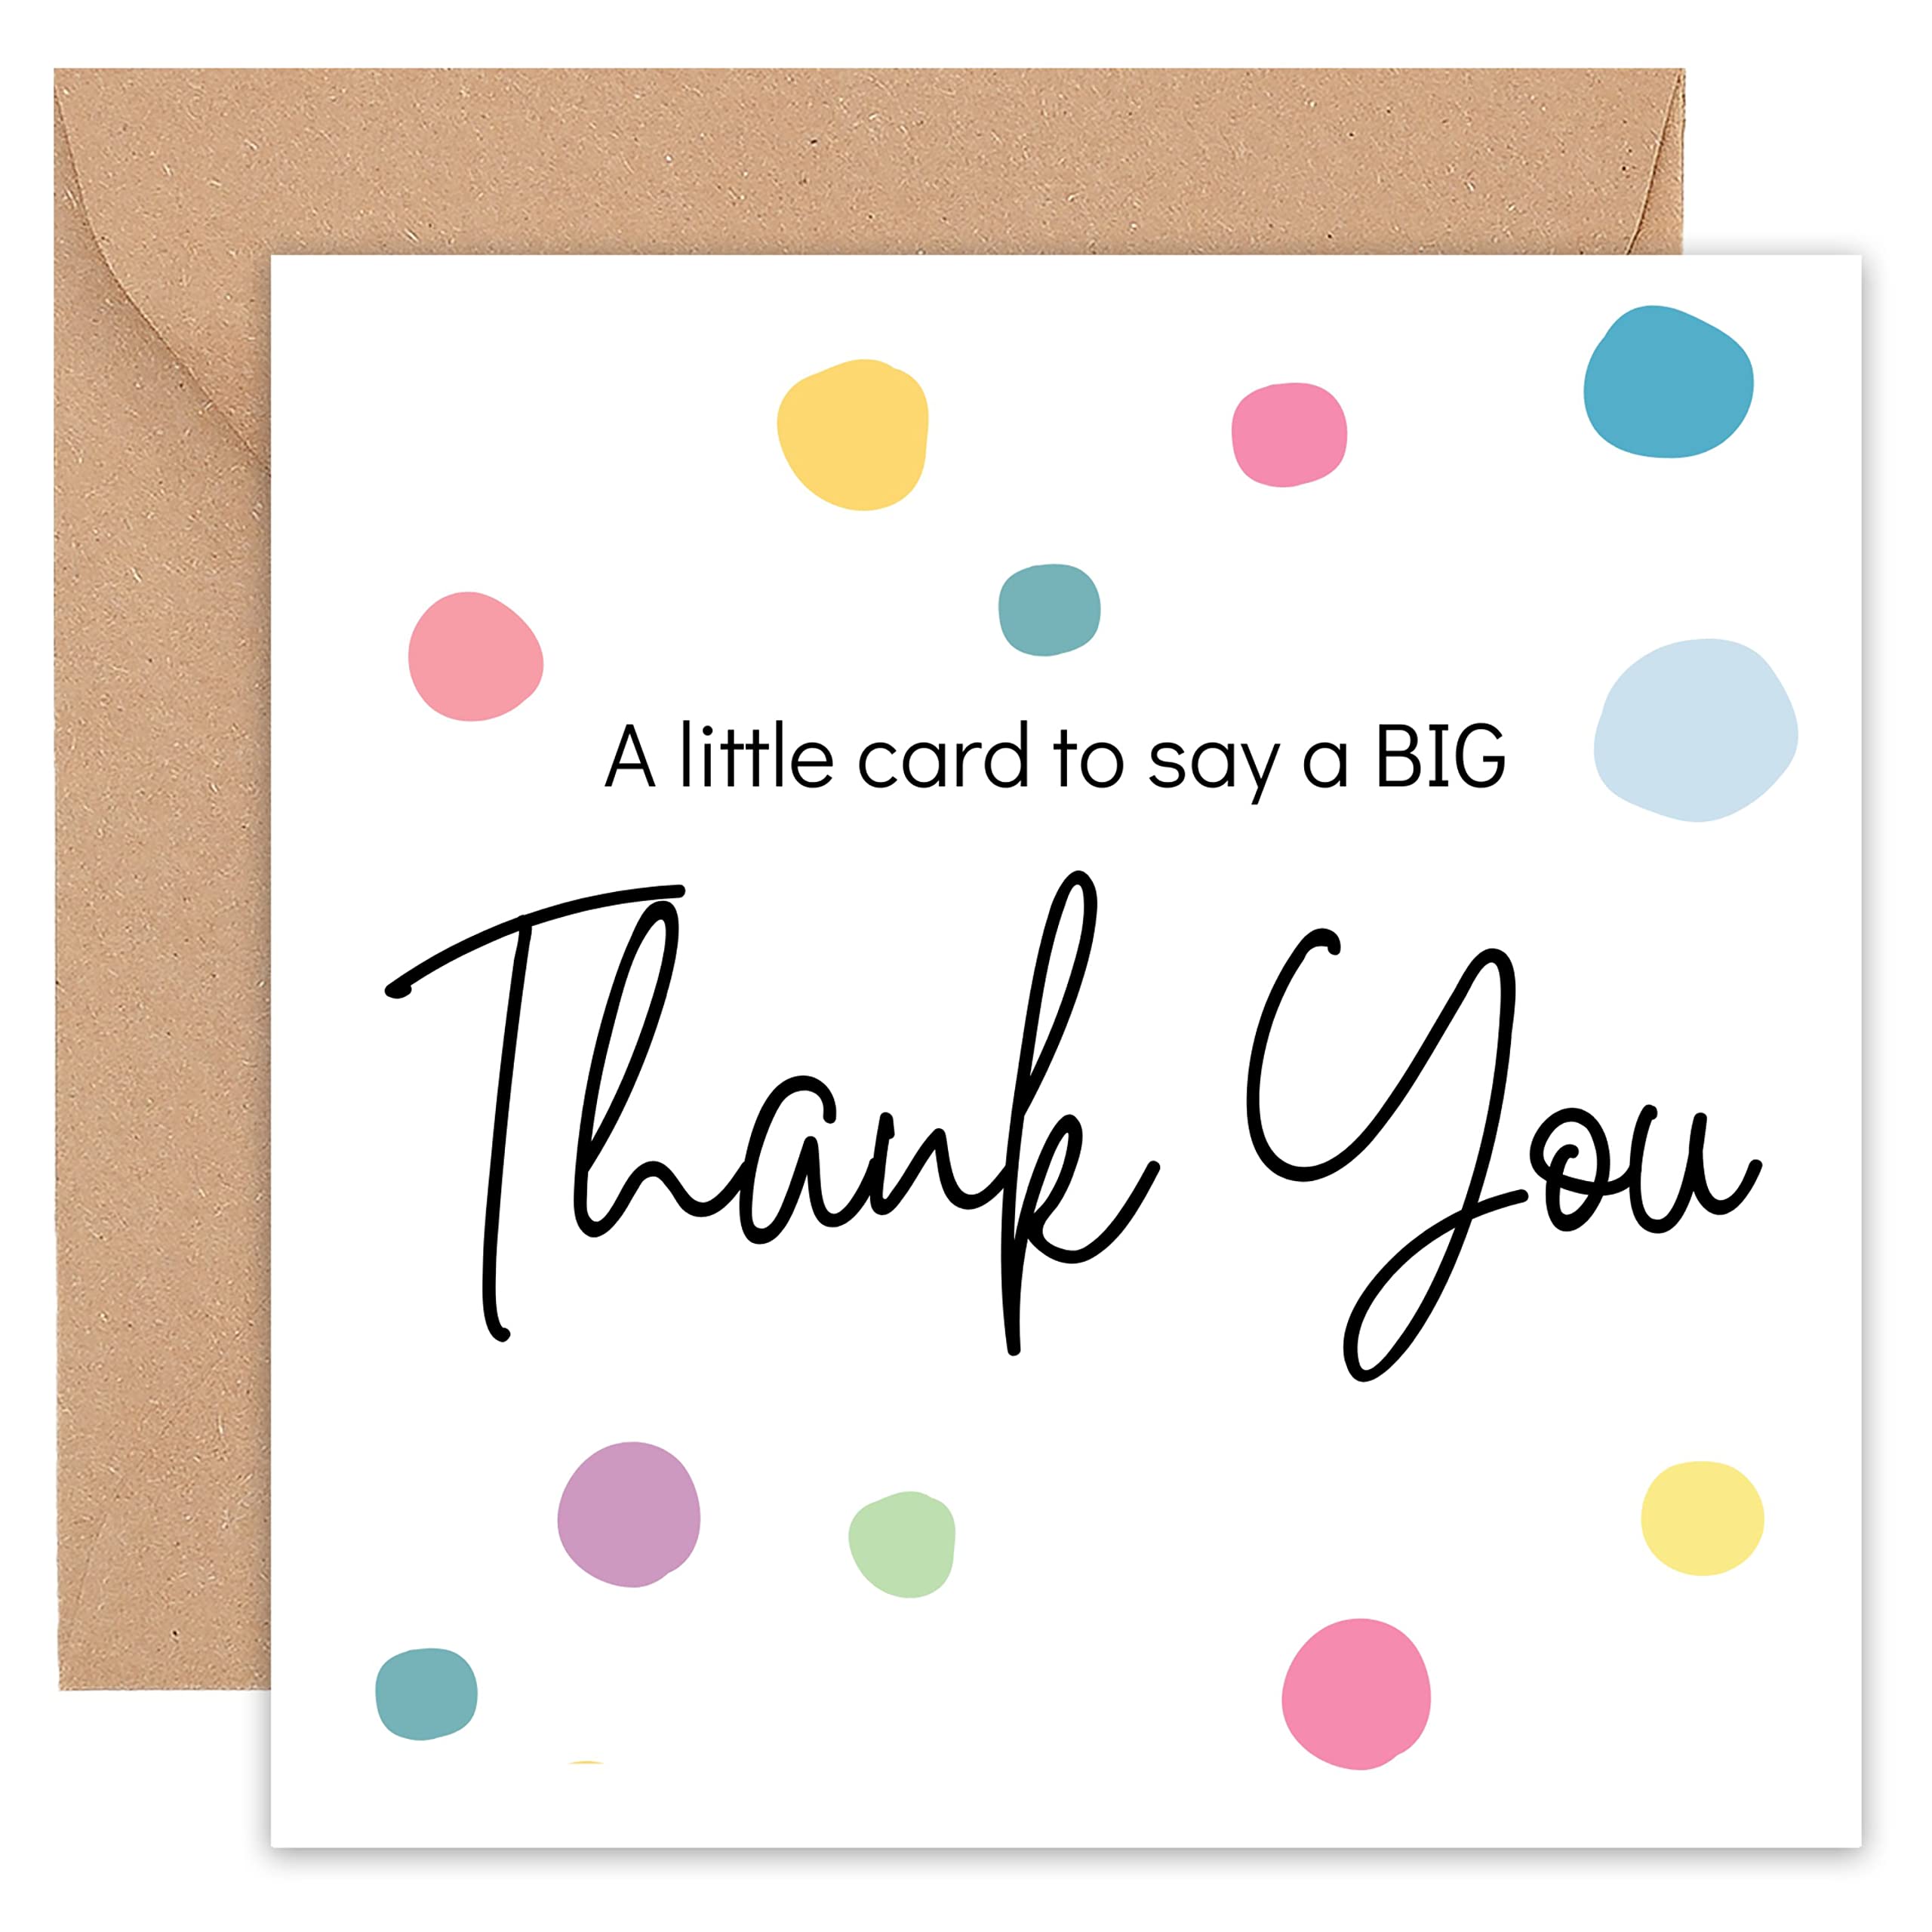 Image of a thank you card